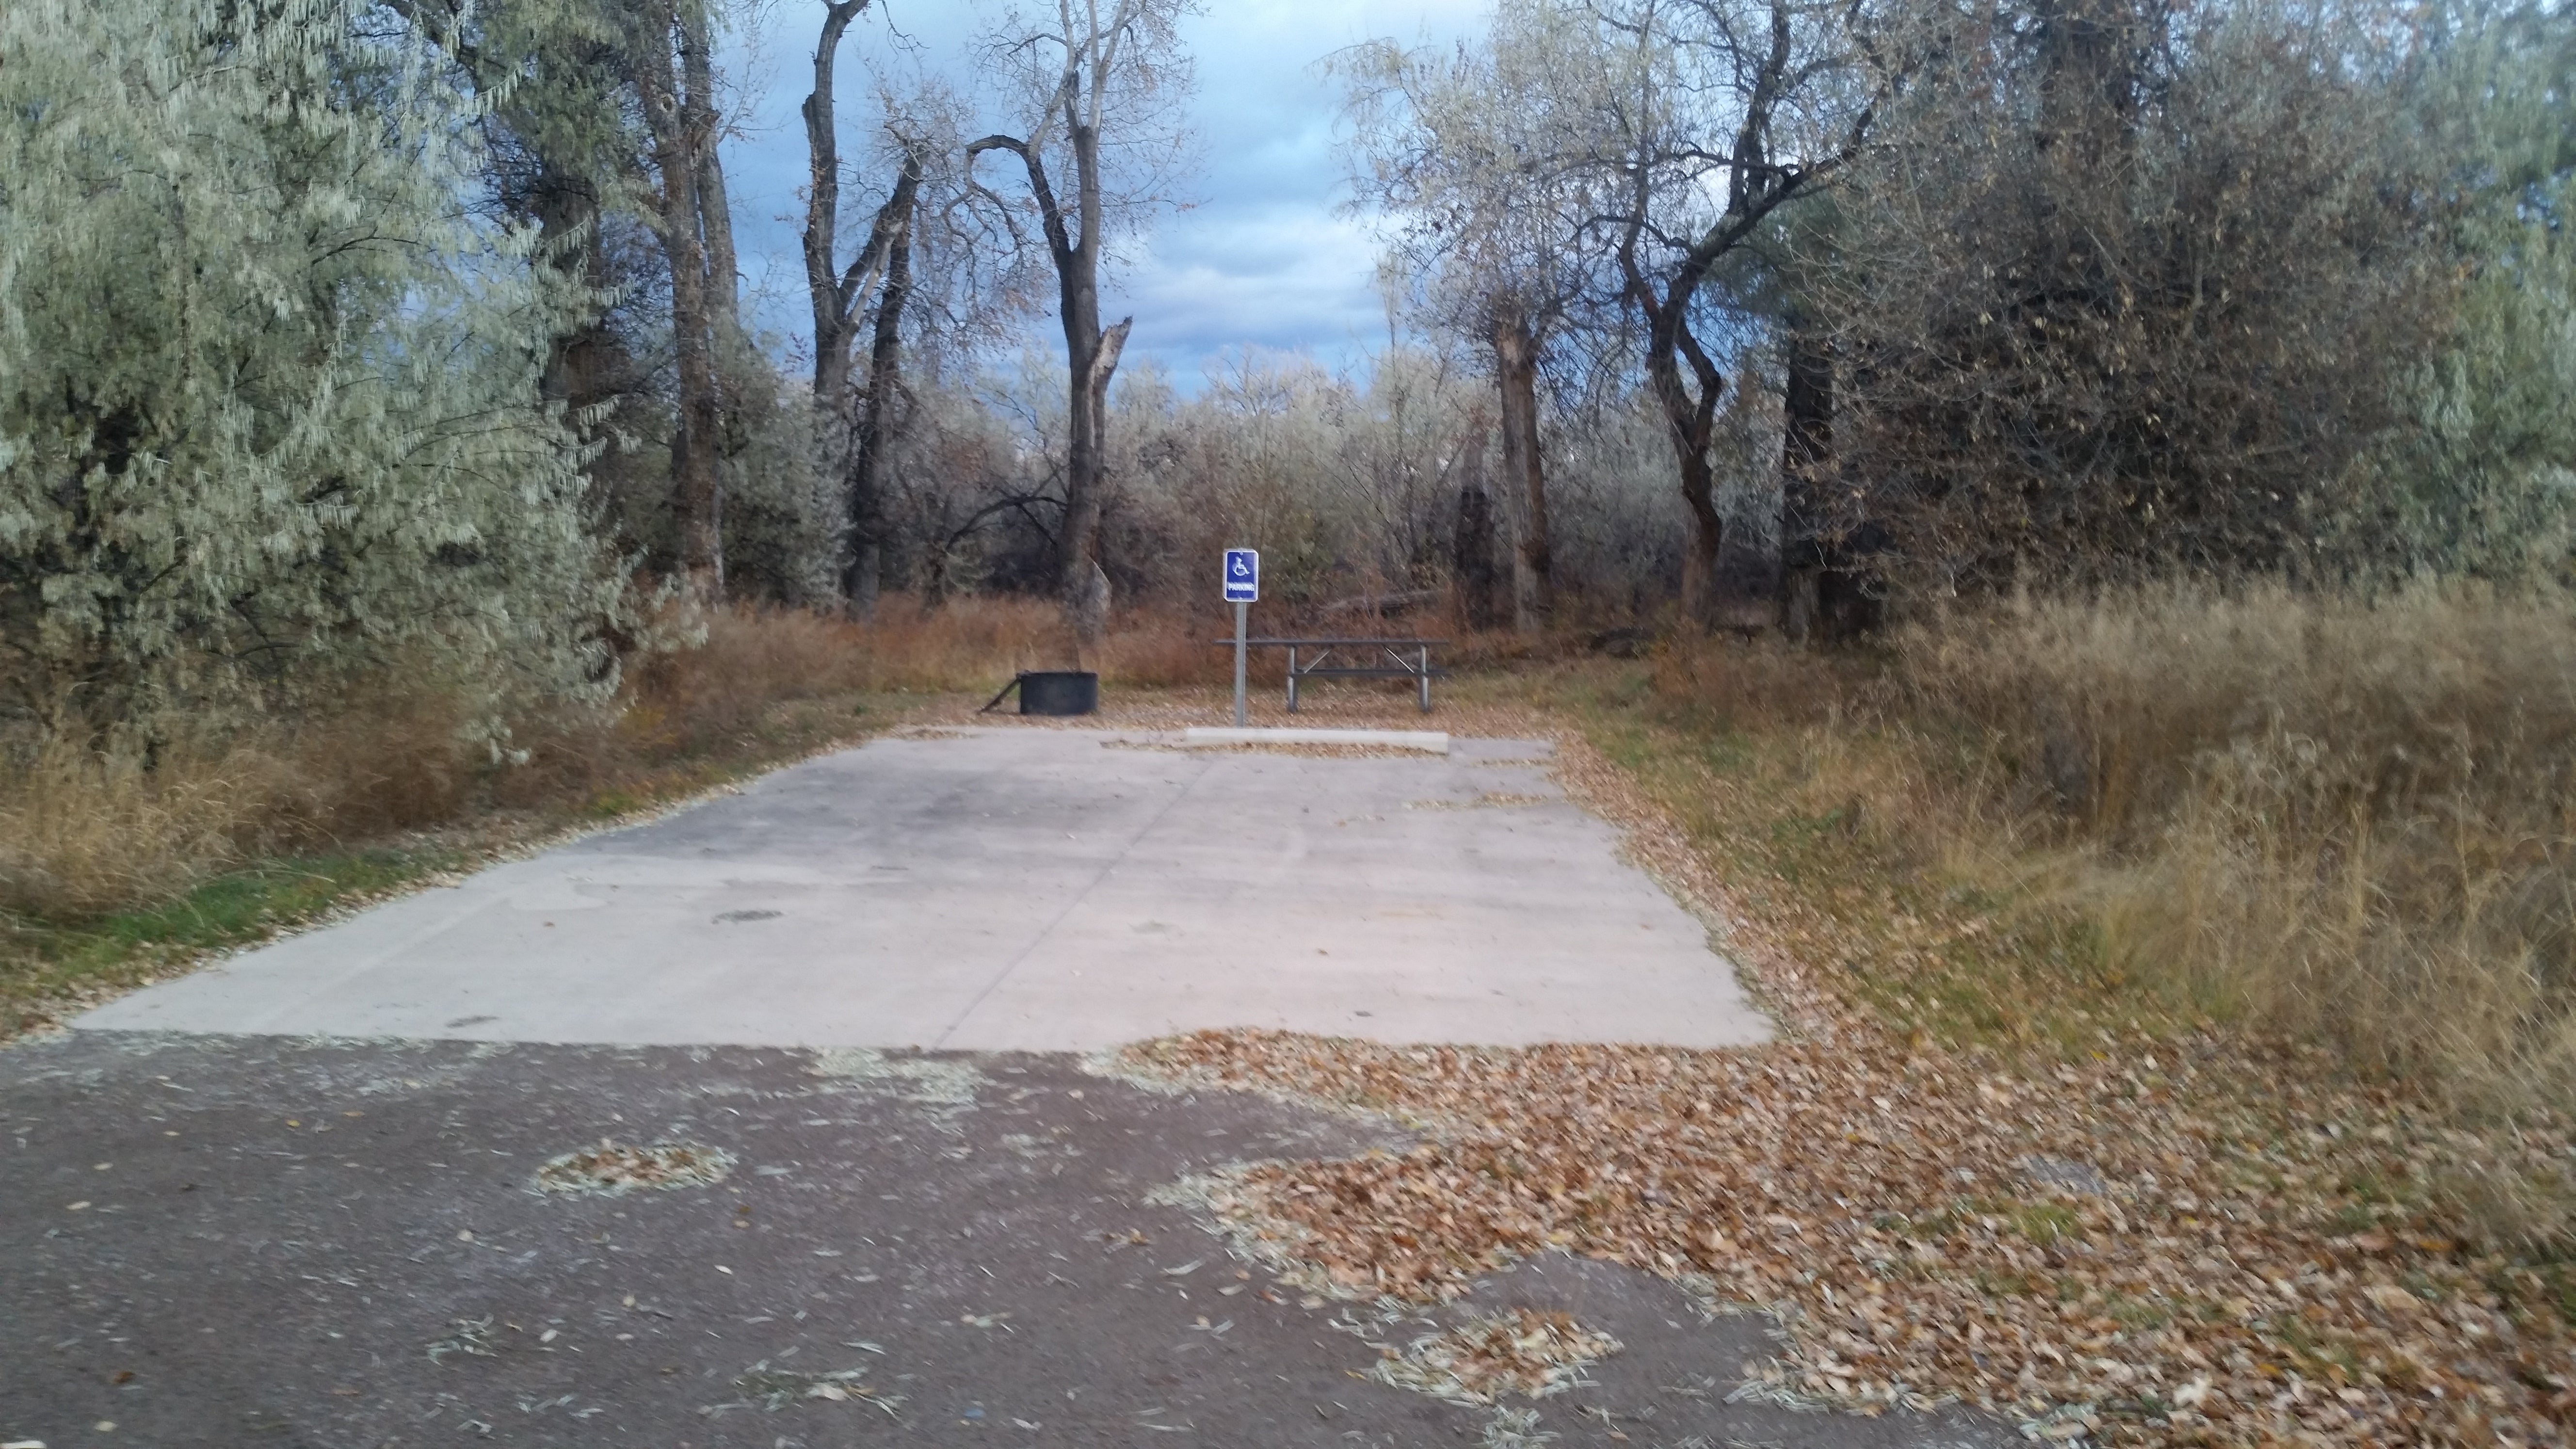 Camper submitted image from Cottonwood Campground - 2